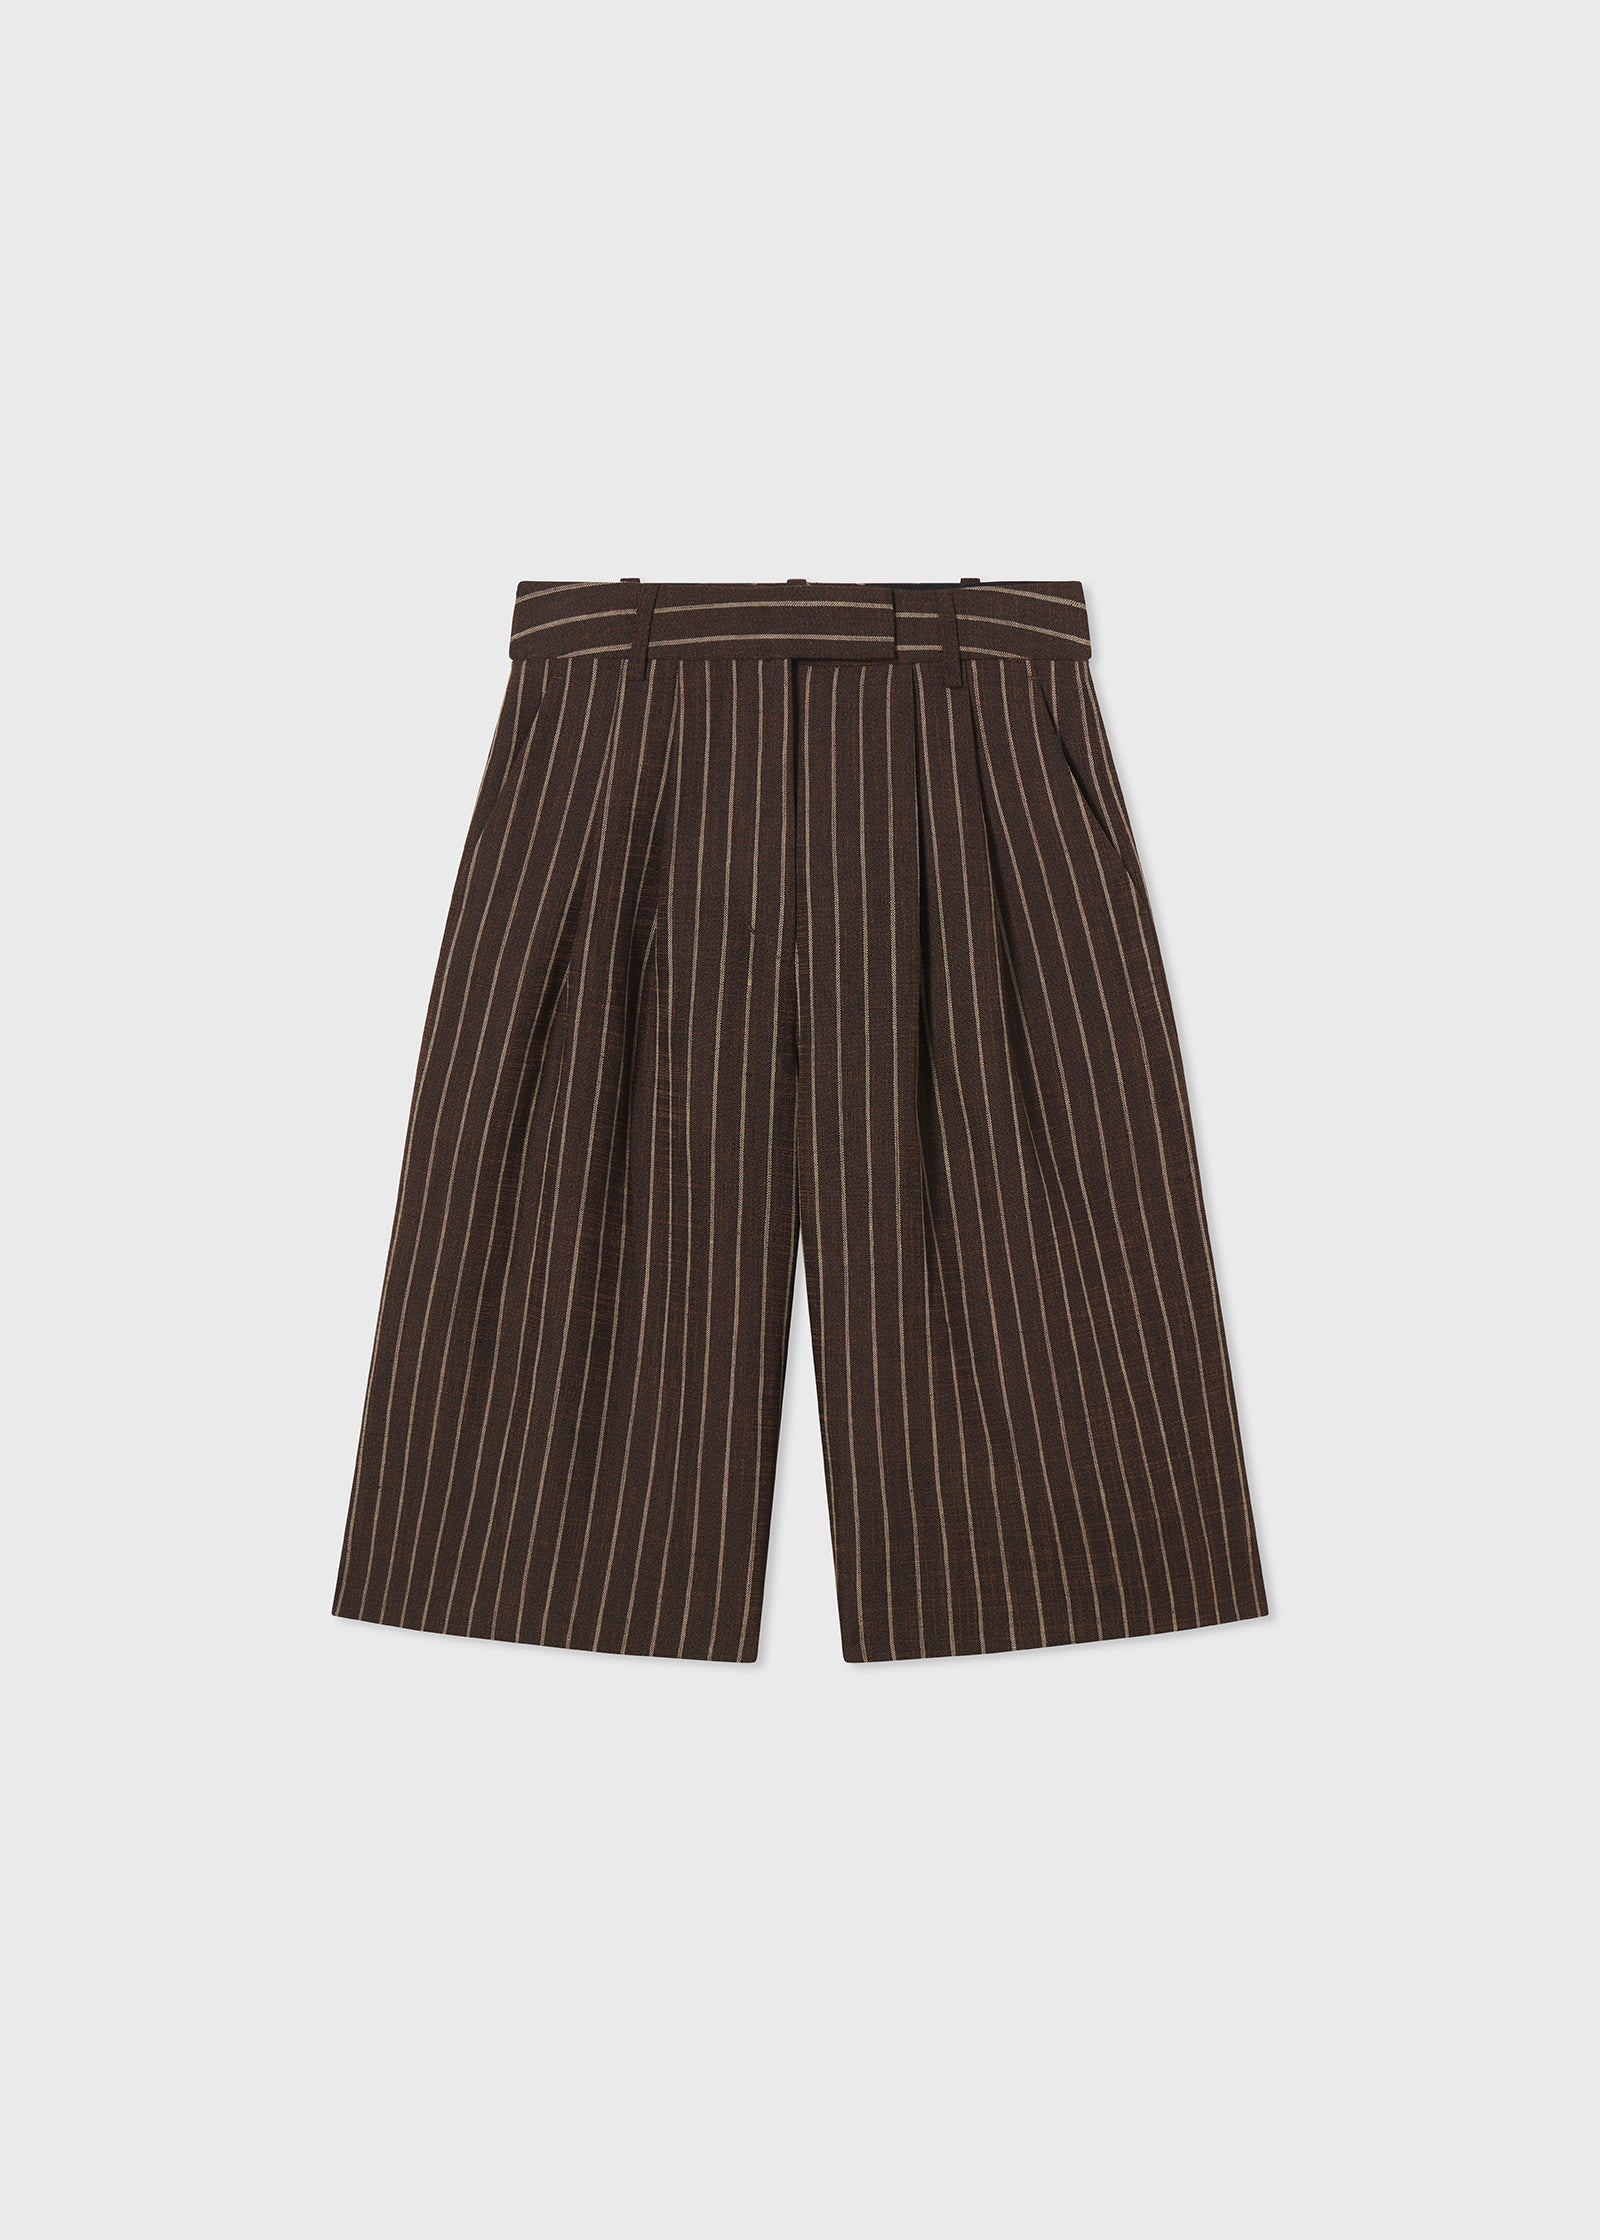 Relaxed Bermuda Short in Linen  - Brown Stripe - CO Collections